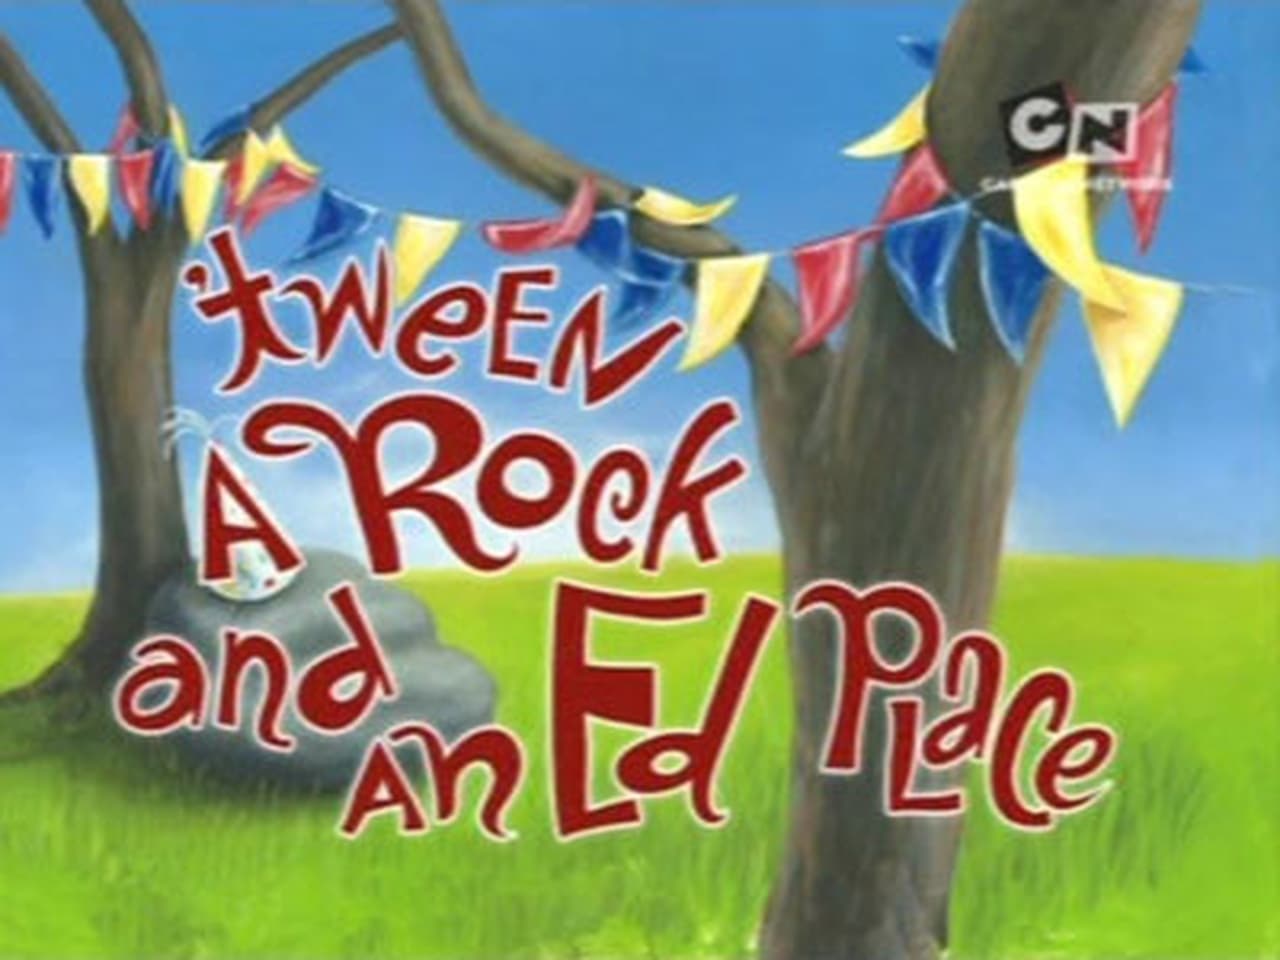 Tween a Rock and an Ed Place